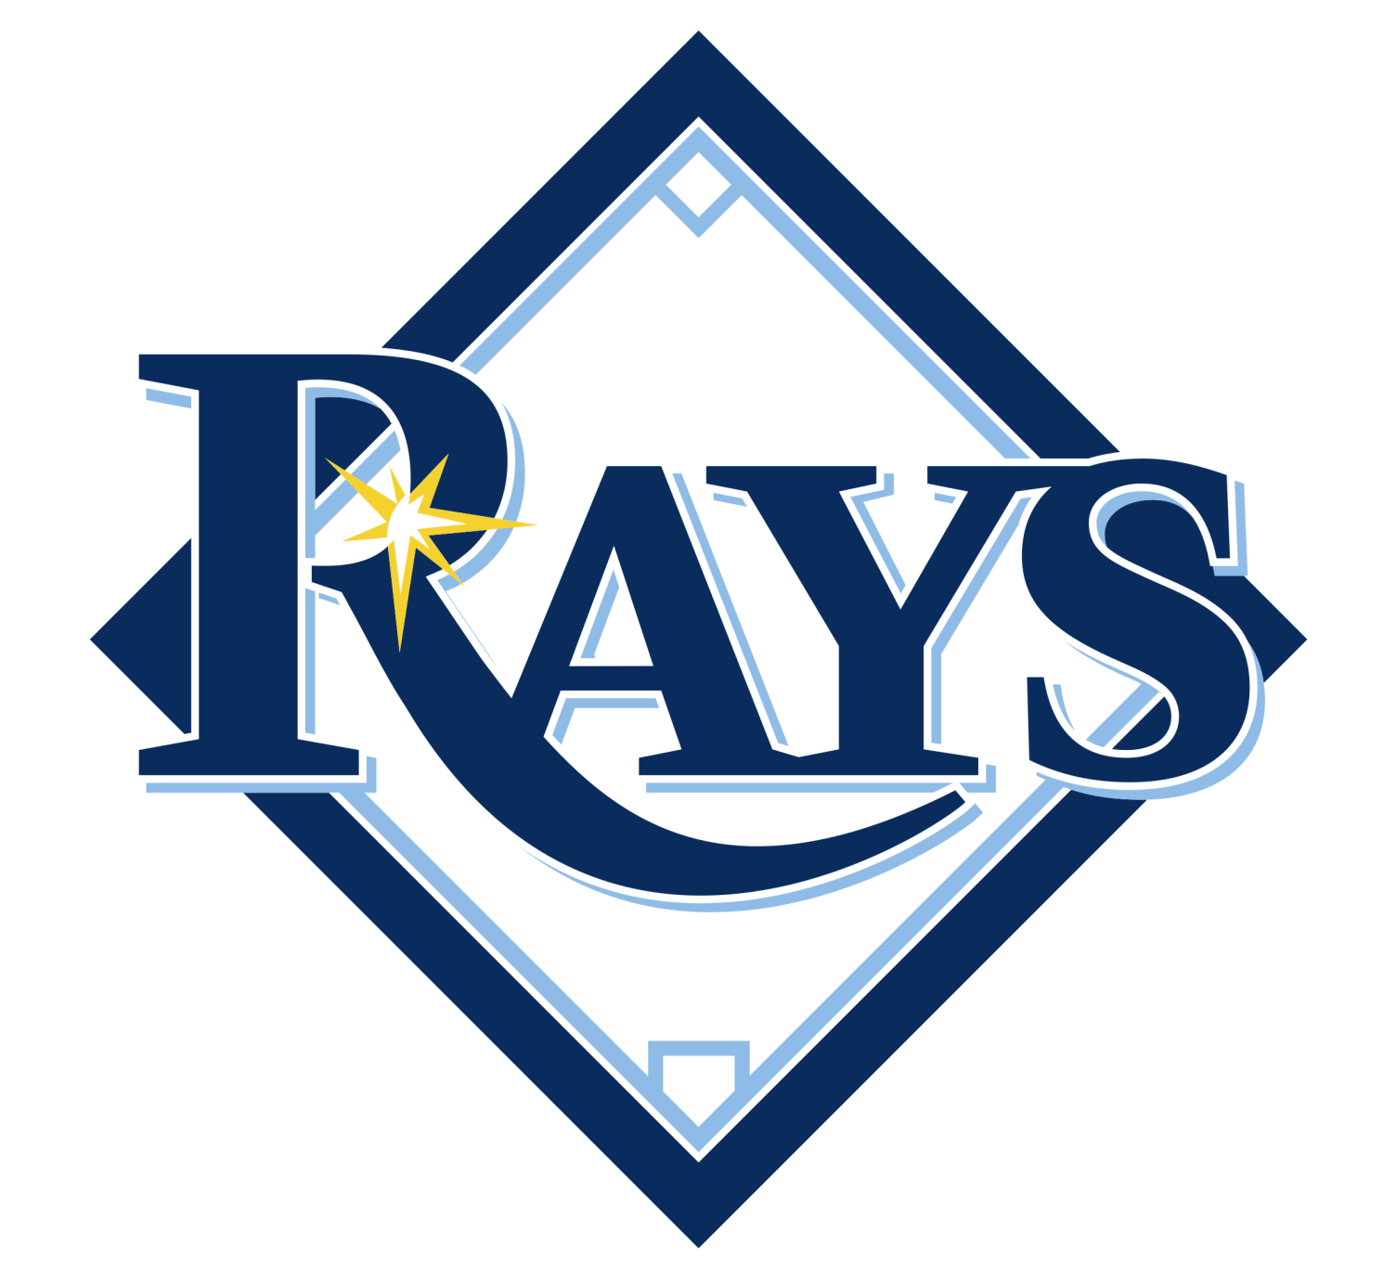 Five legitimate excuses for the Tampa Bay Rays' struggling attendance